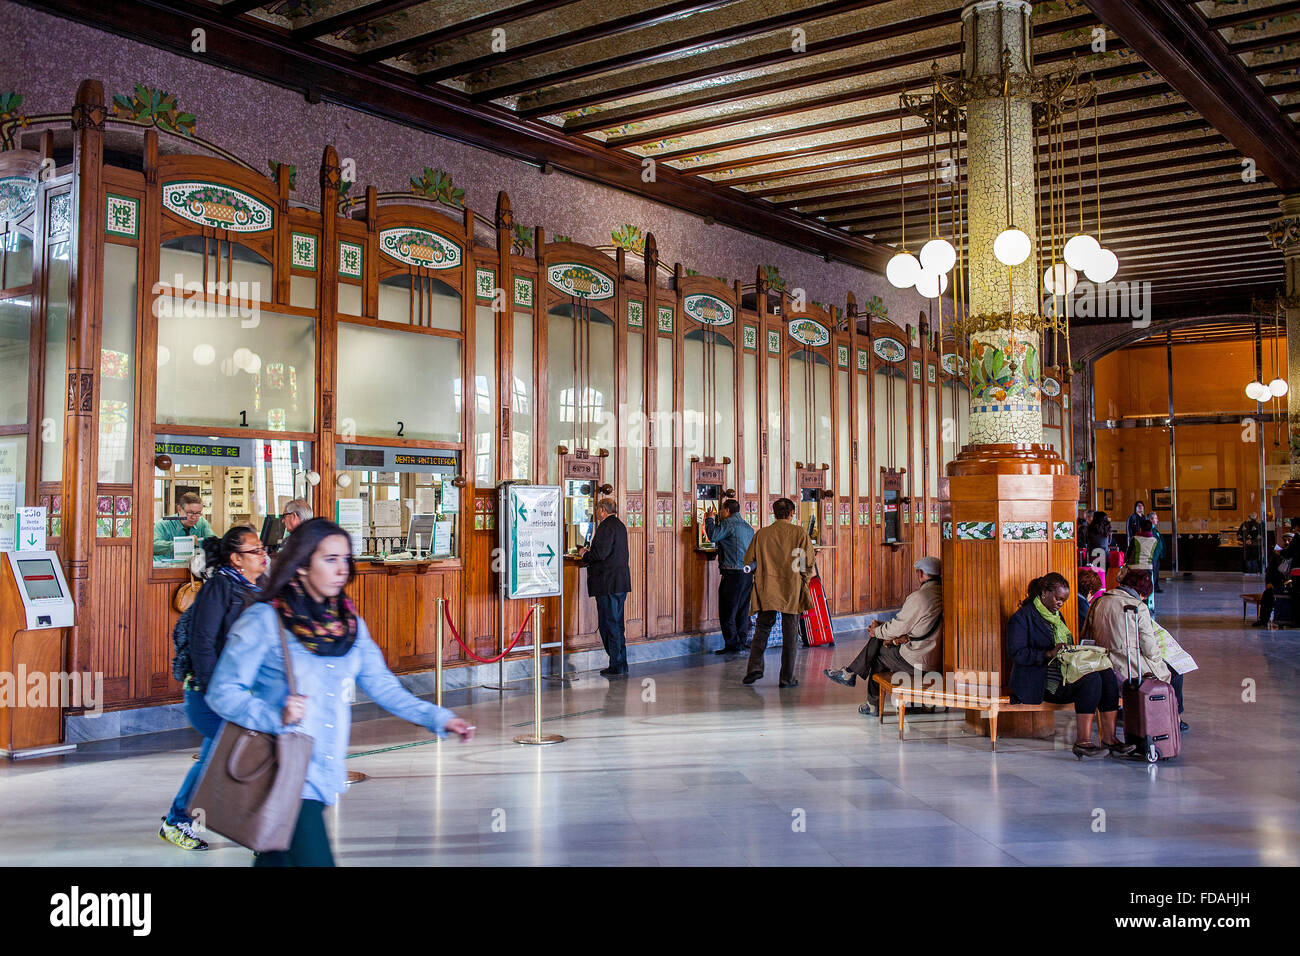 North Station Railway. It was built, in art nouveau style, between 1909 and 1917,Valencia, Spain. Stock Photo